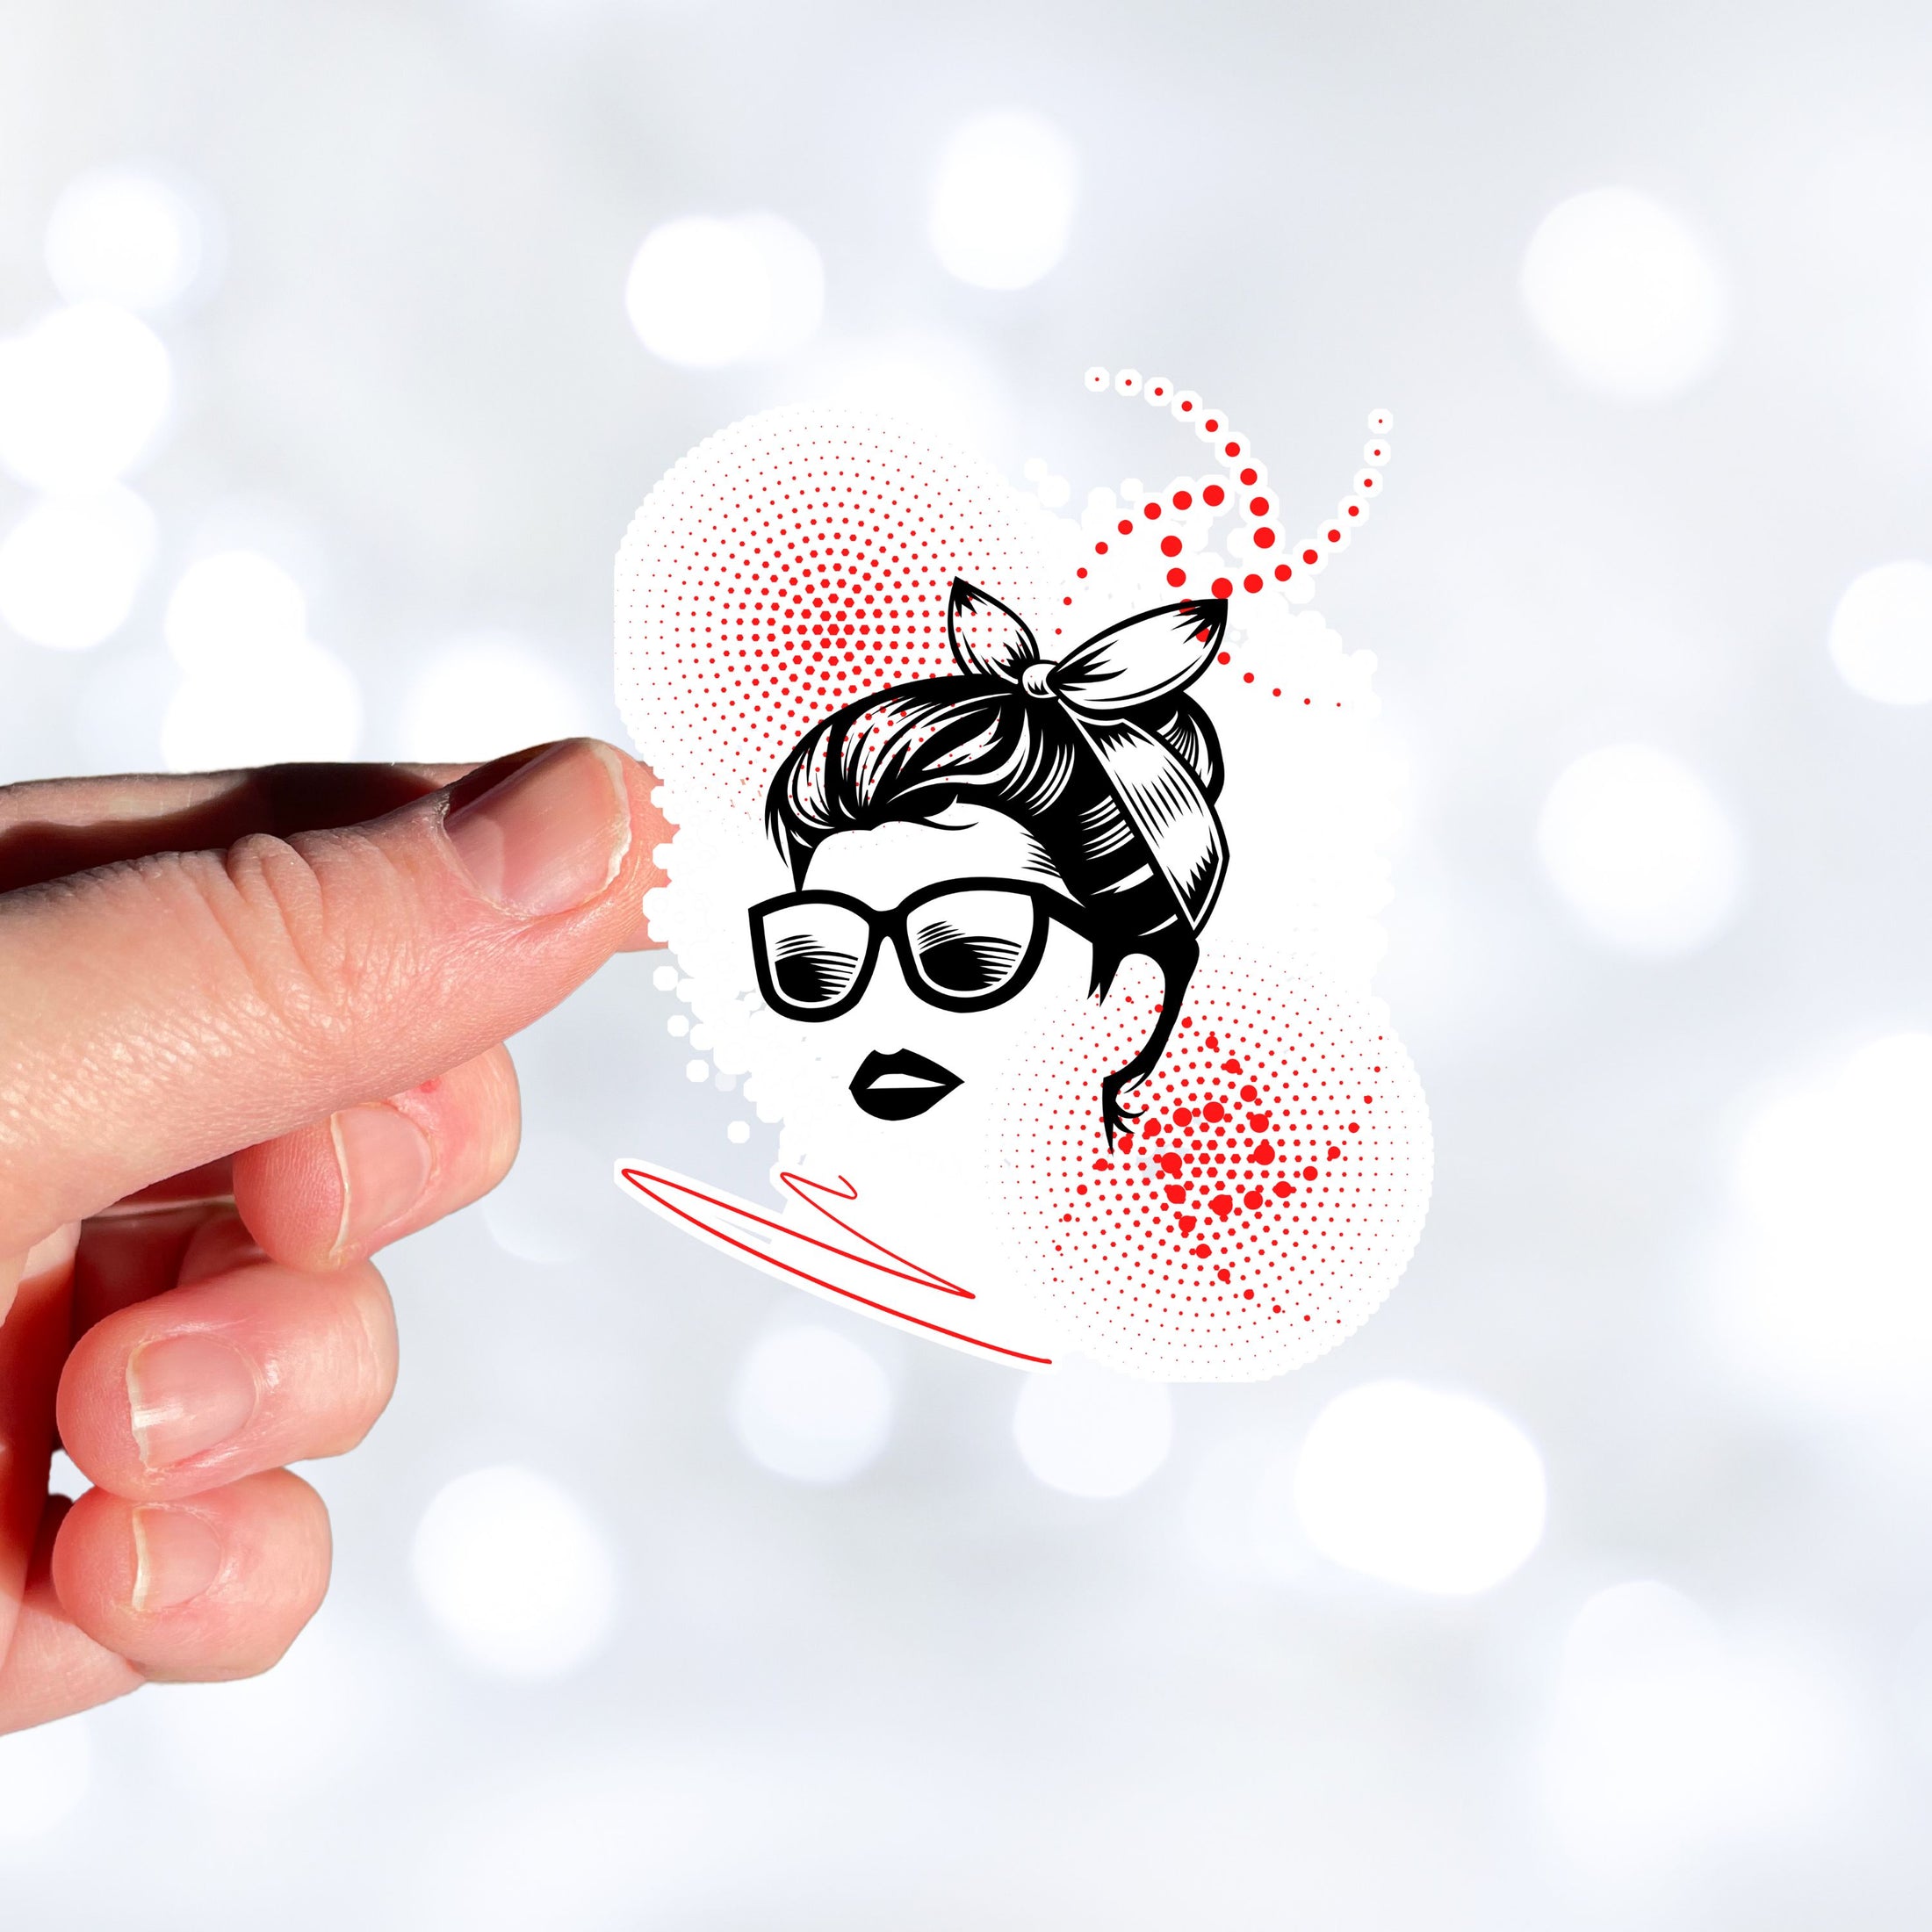 Trash Polka uses red, black, and white with a combination of abstract, surrealistic, and realistic images, and this individual die-cut sticker features a woman wearing sunglasses with her hair tied up on a white background with red swirls. This image shows a hand holding the trash polka woman sticker.